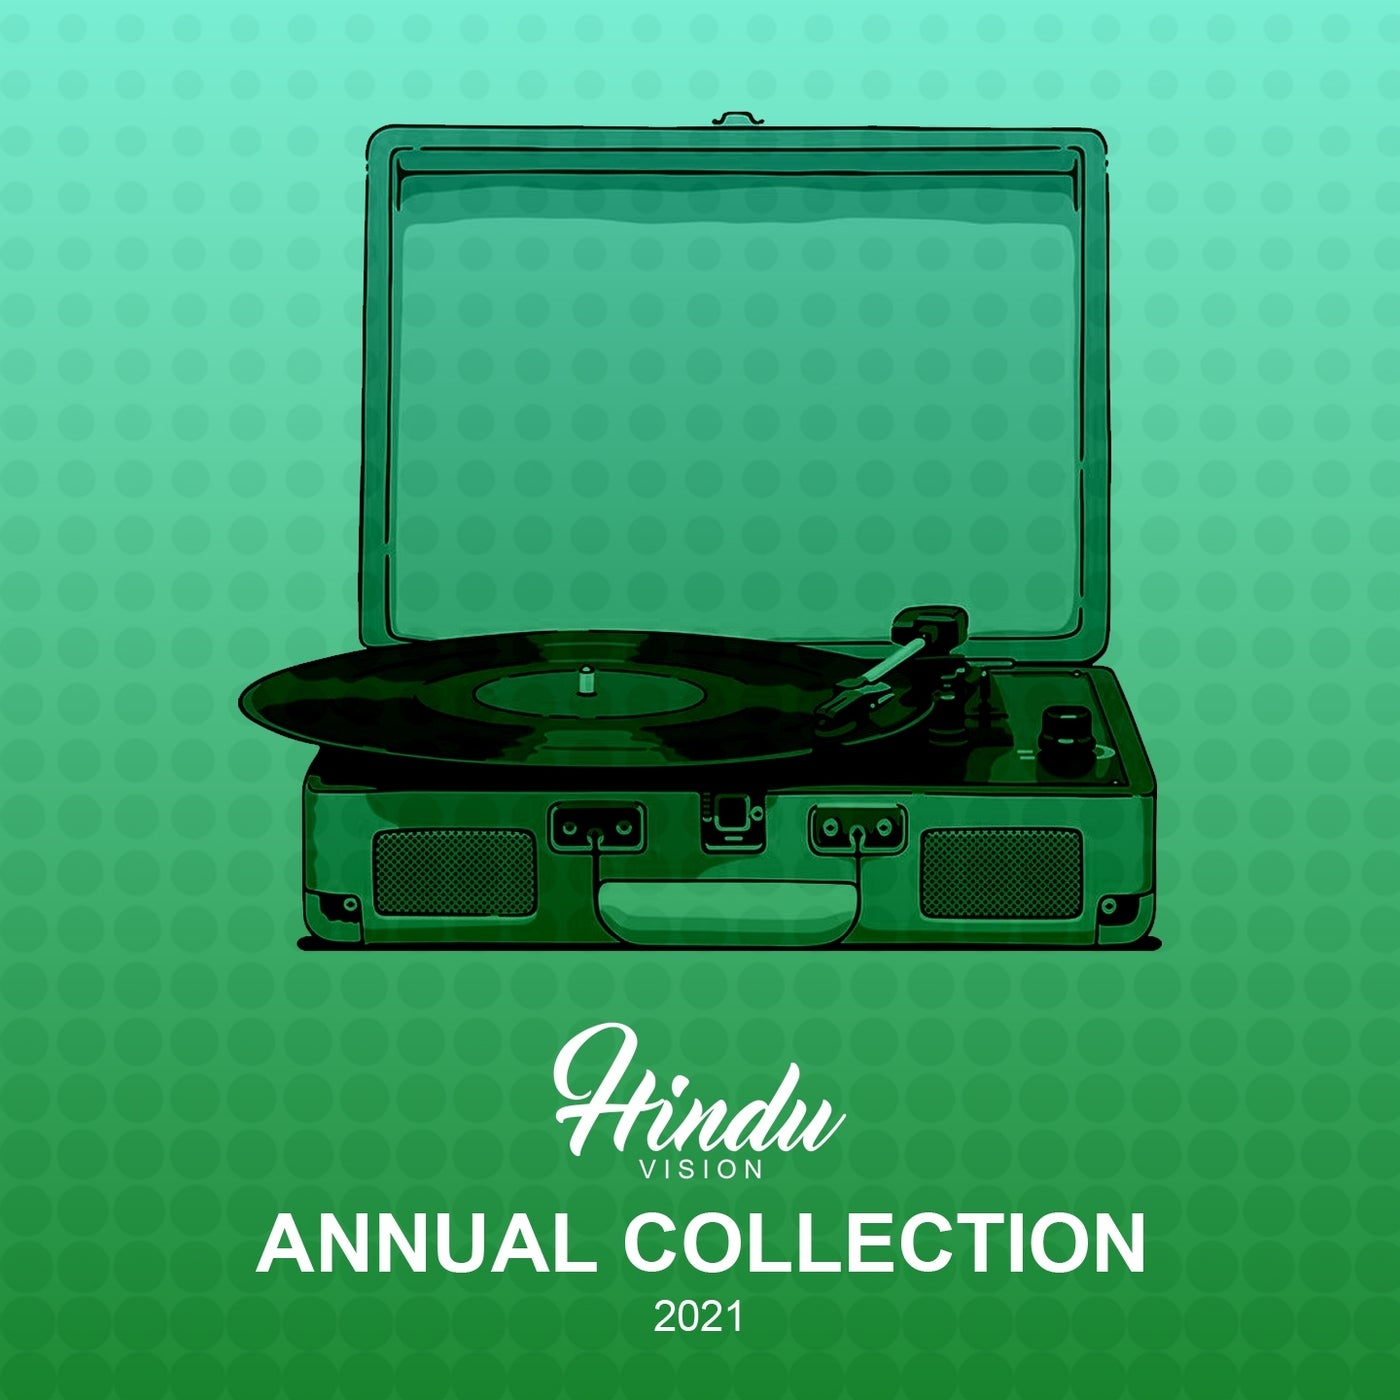 Annual Collection 2021